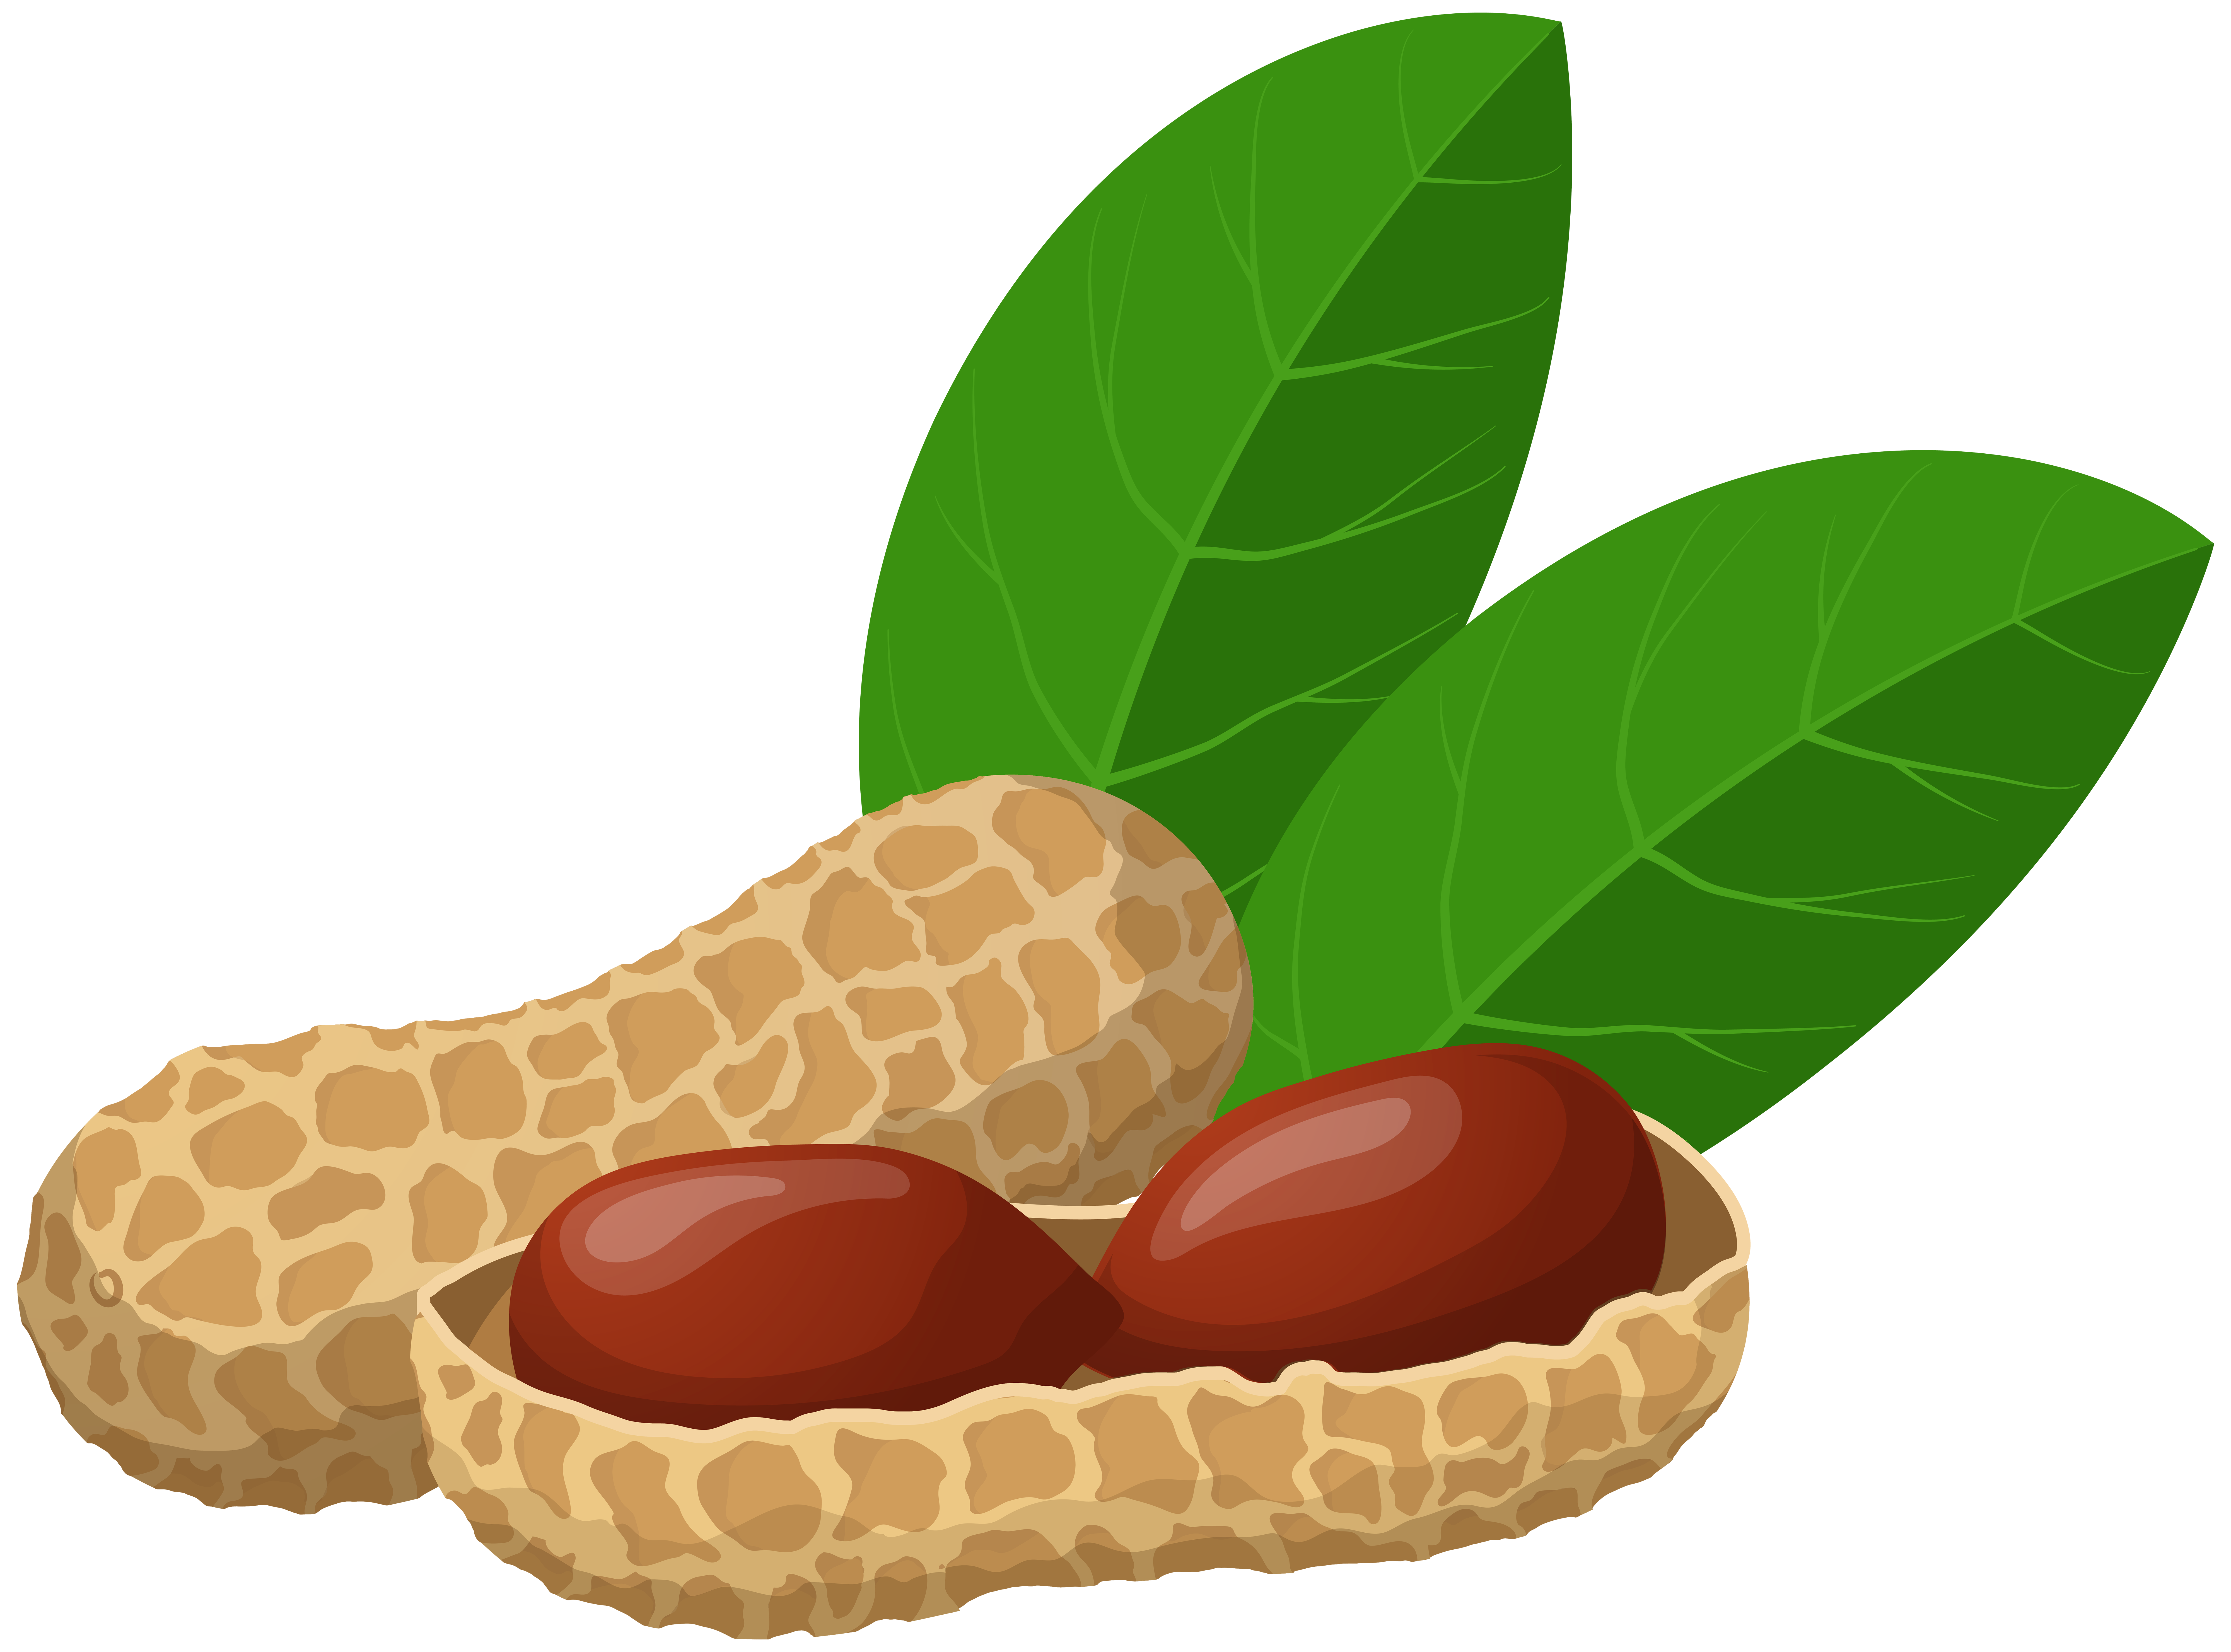 Cameroon nut clipart - Clipground8000 x 5925